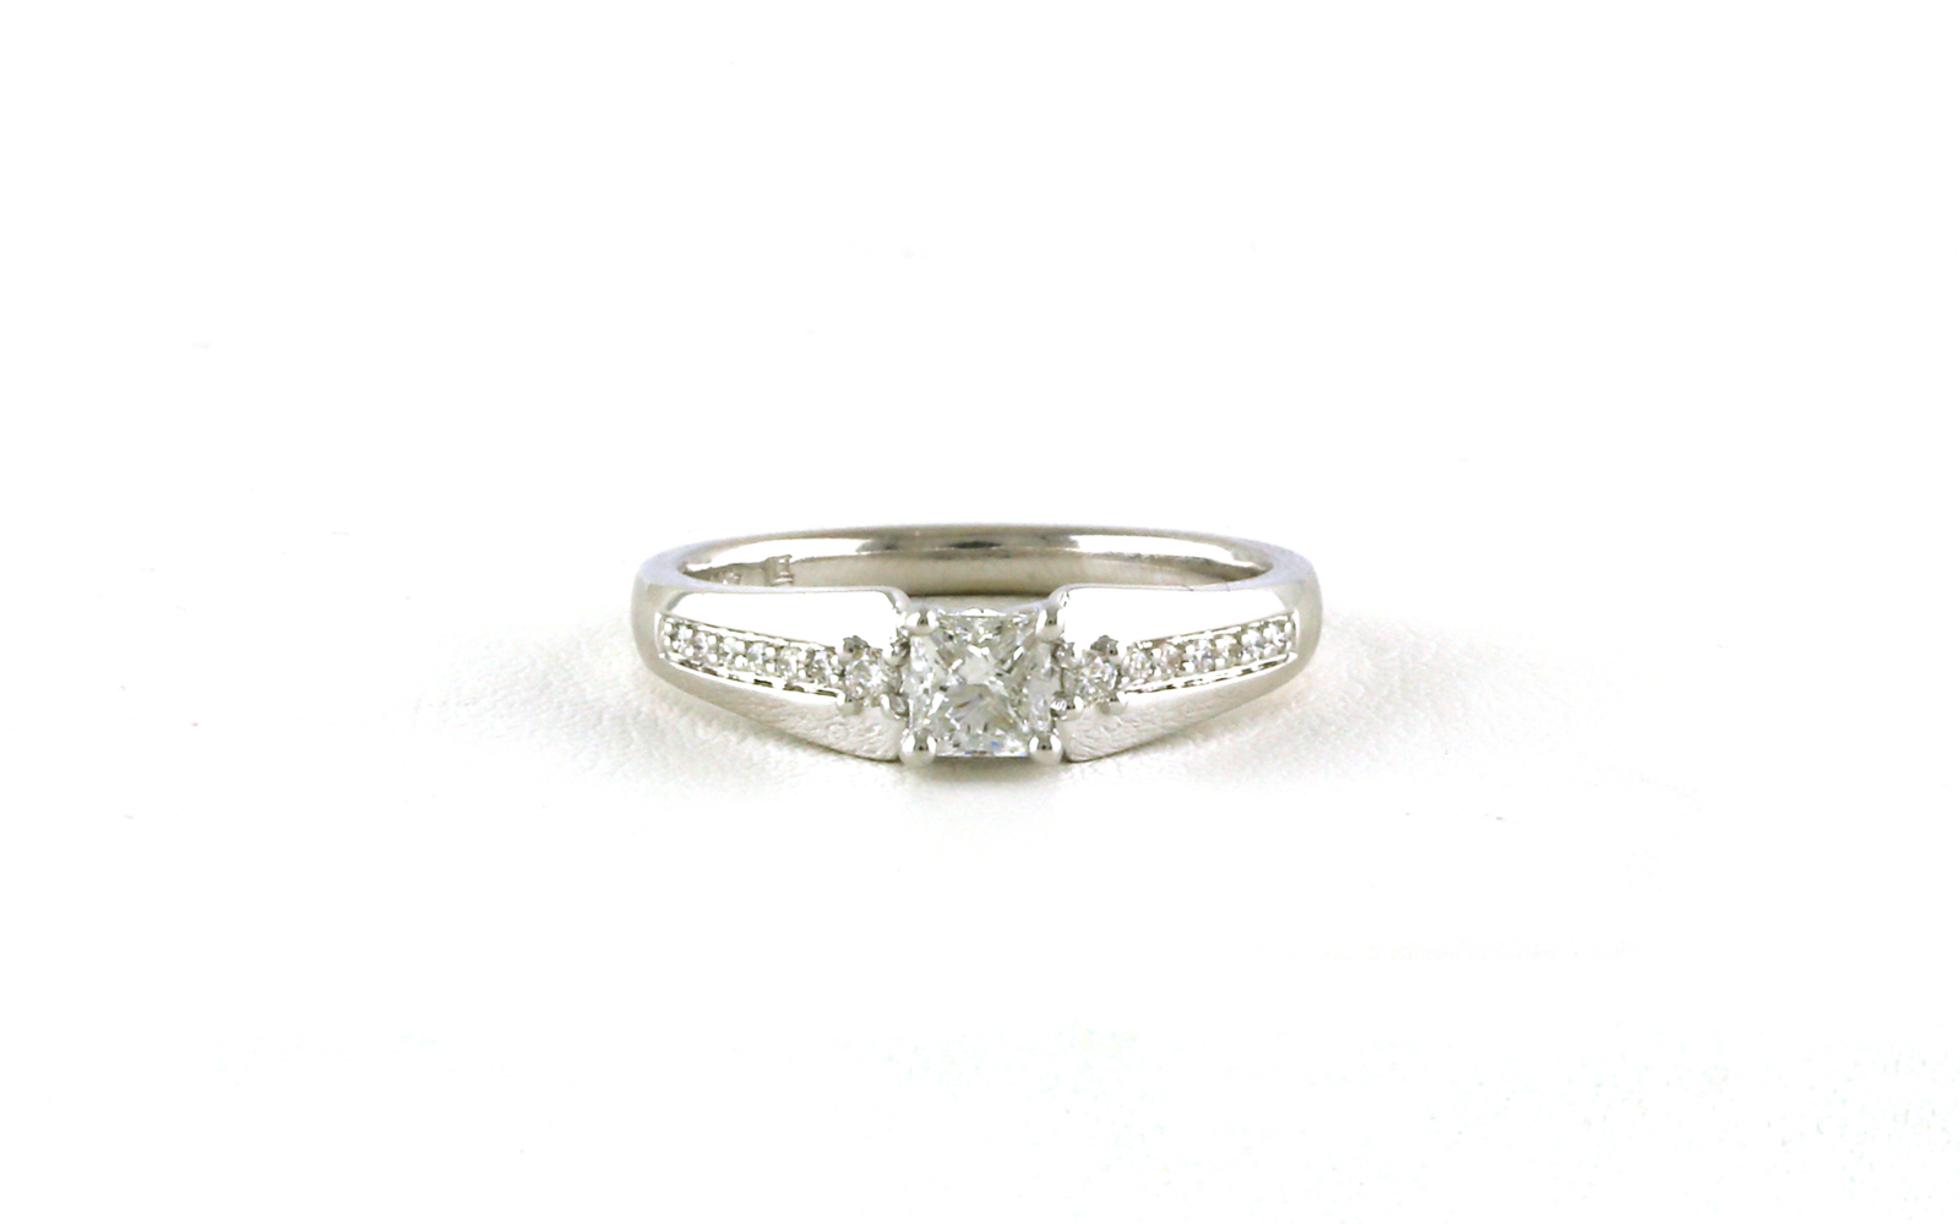 Wide Princess-cut Diamond Ring with Inset Accent Diamonds in White Gold (0.39cts)